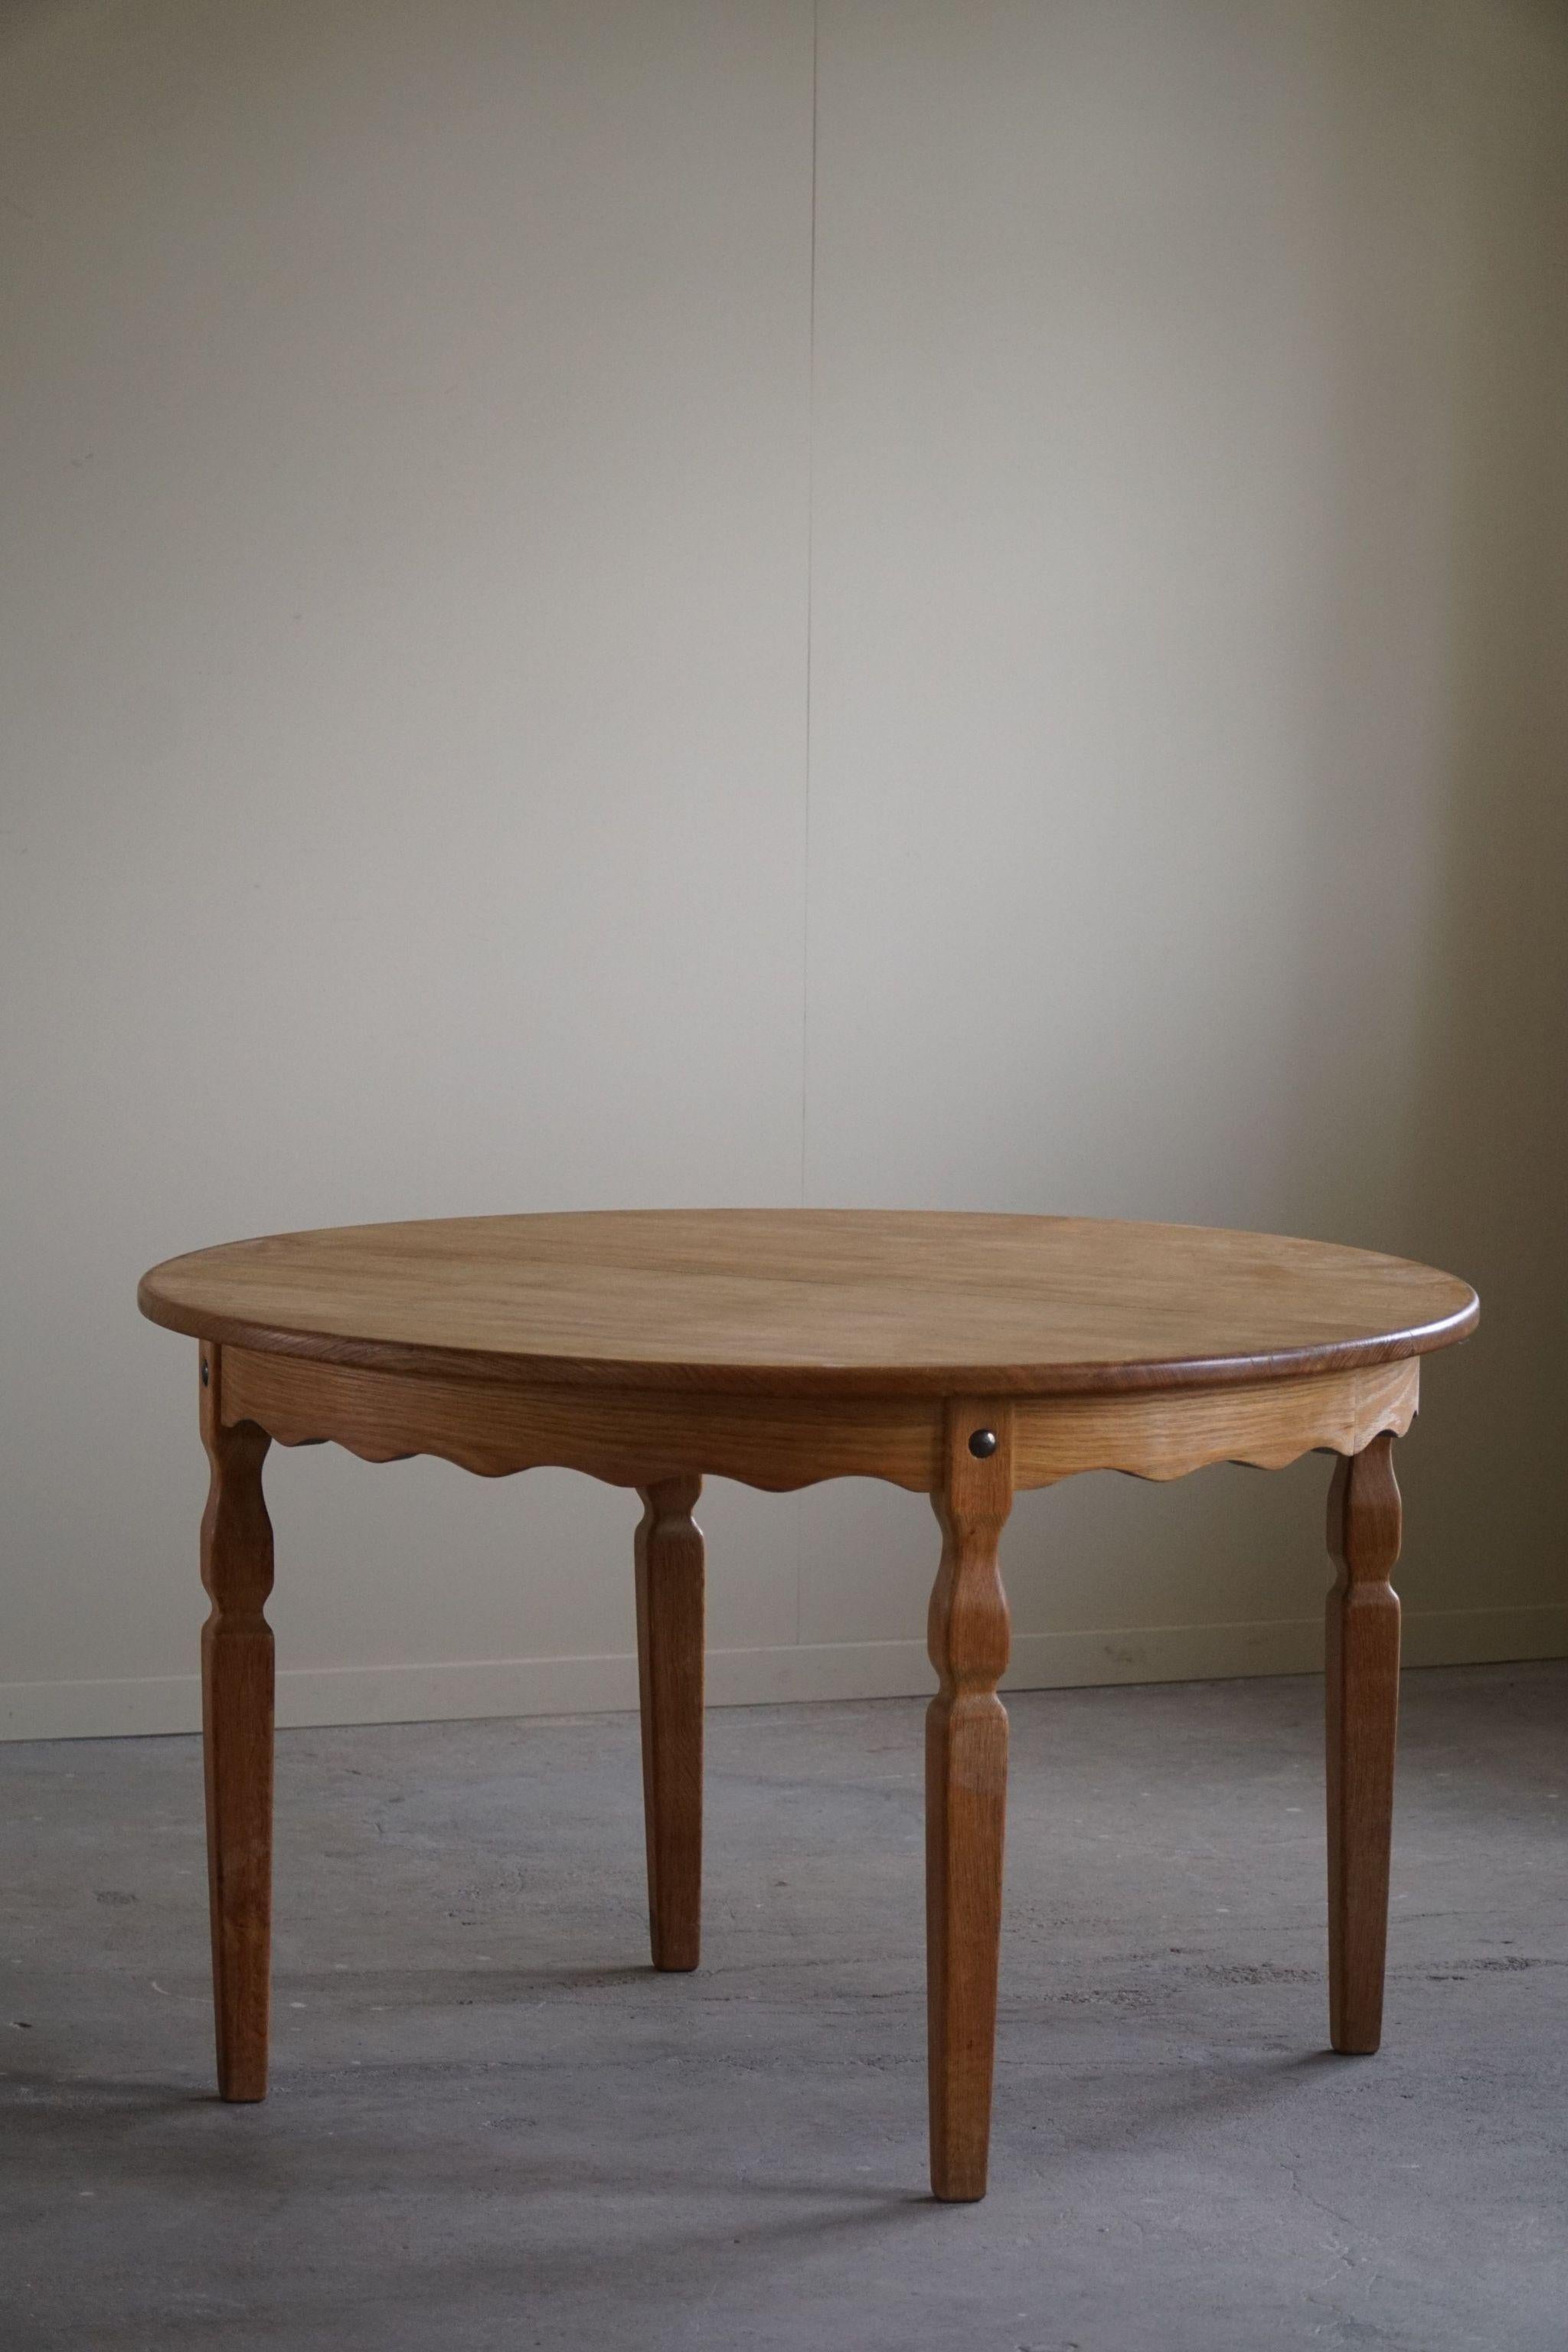 Danish Modern, Round Dining Table in Oak with Two Extensions, Mid Century, 1960s For Sale 5